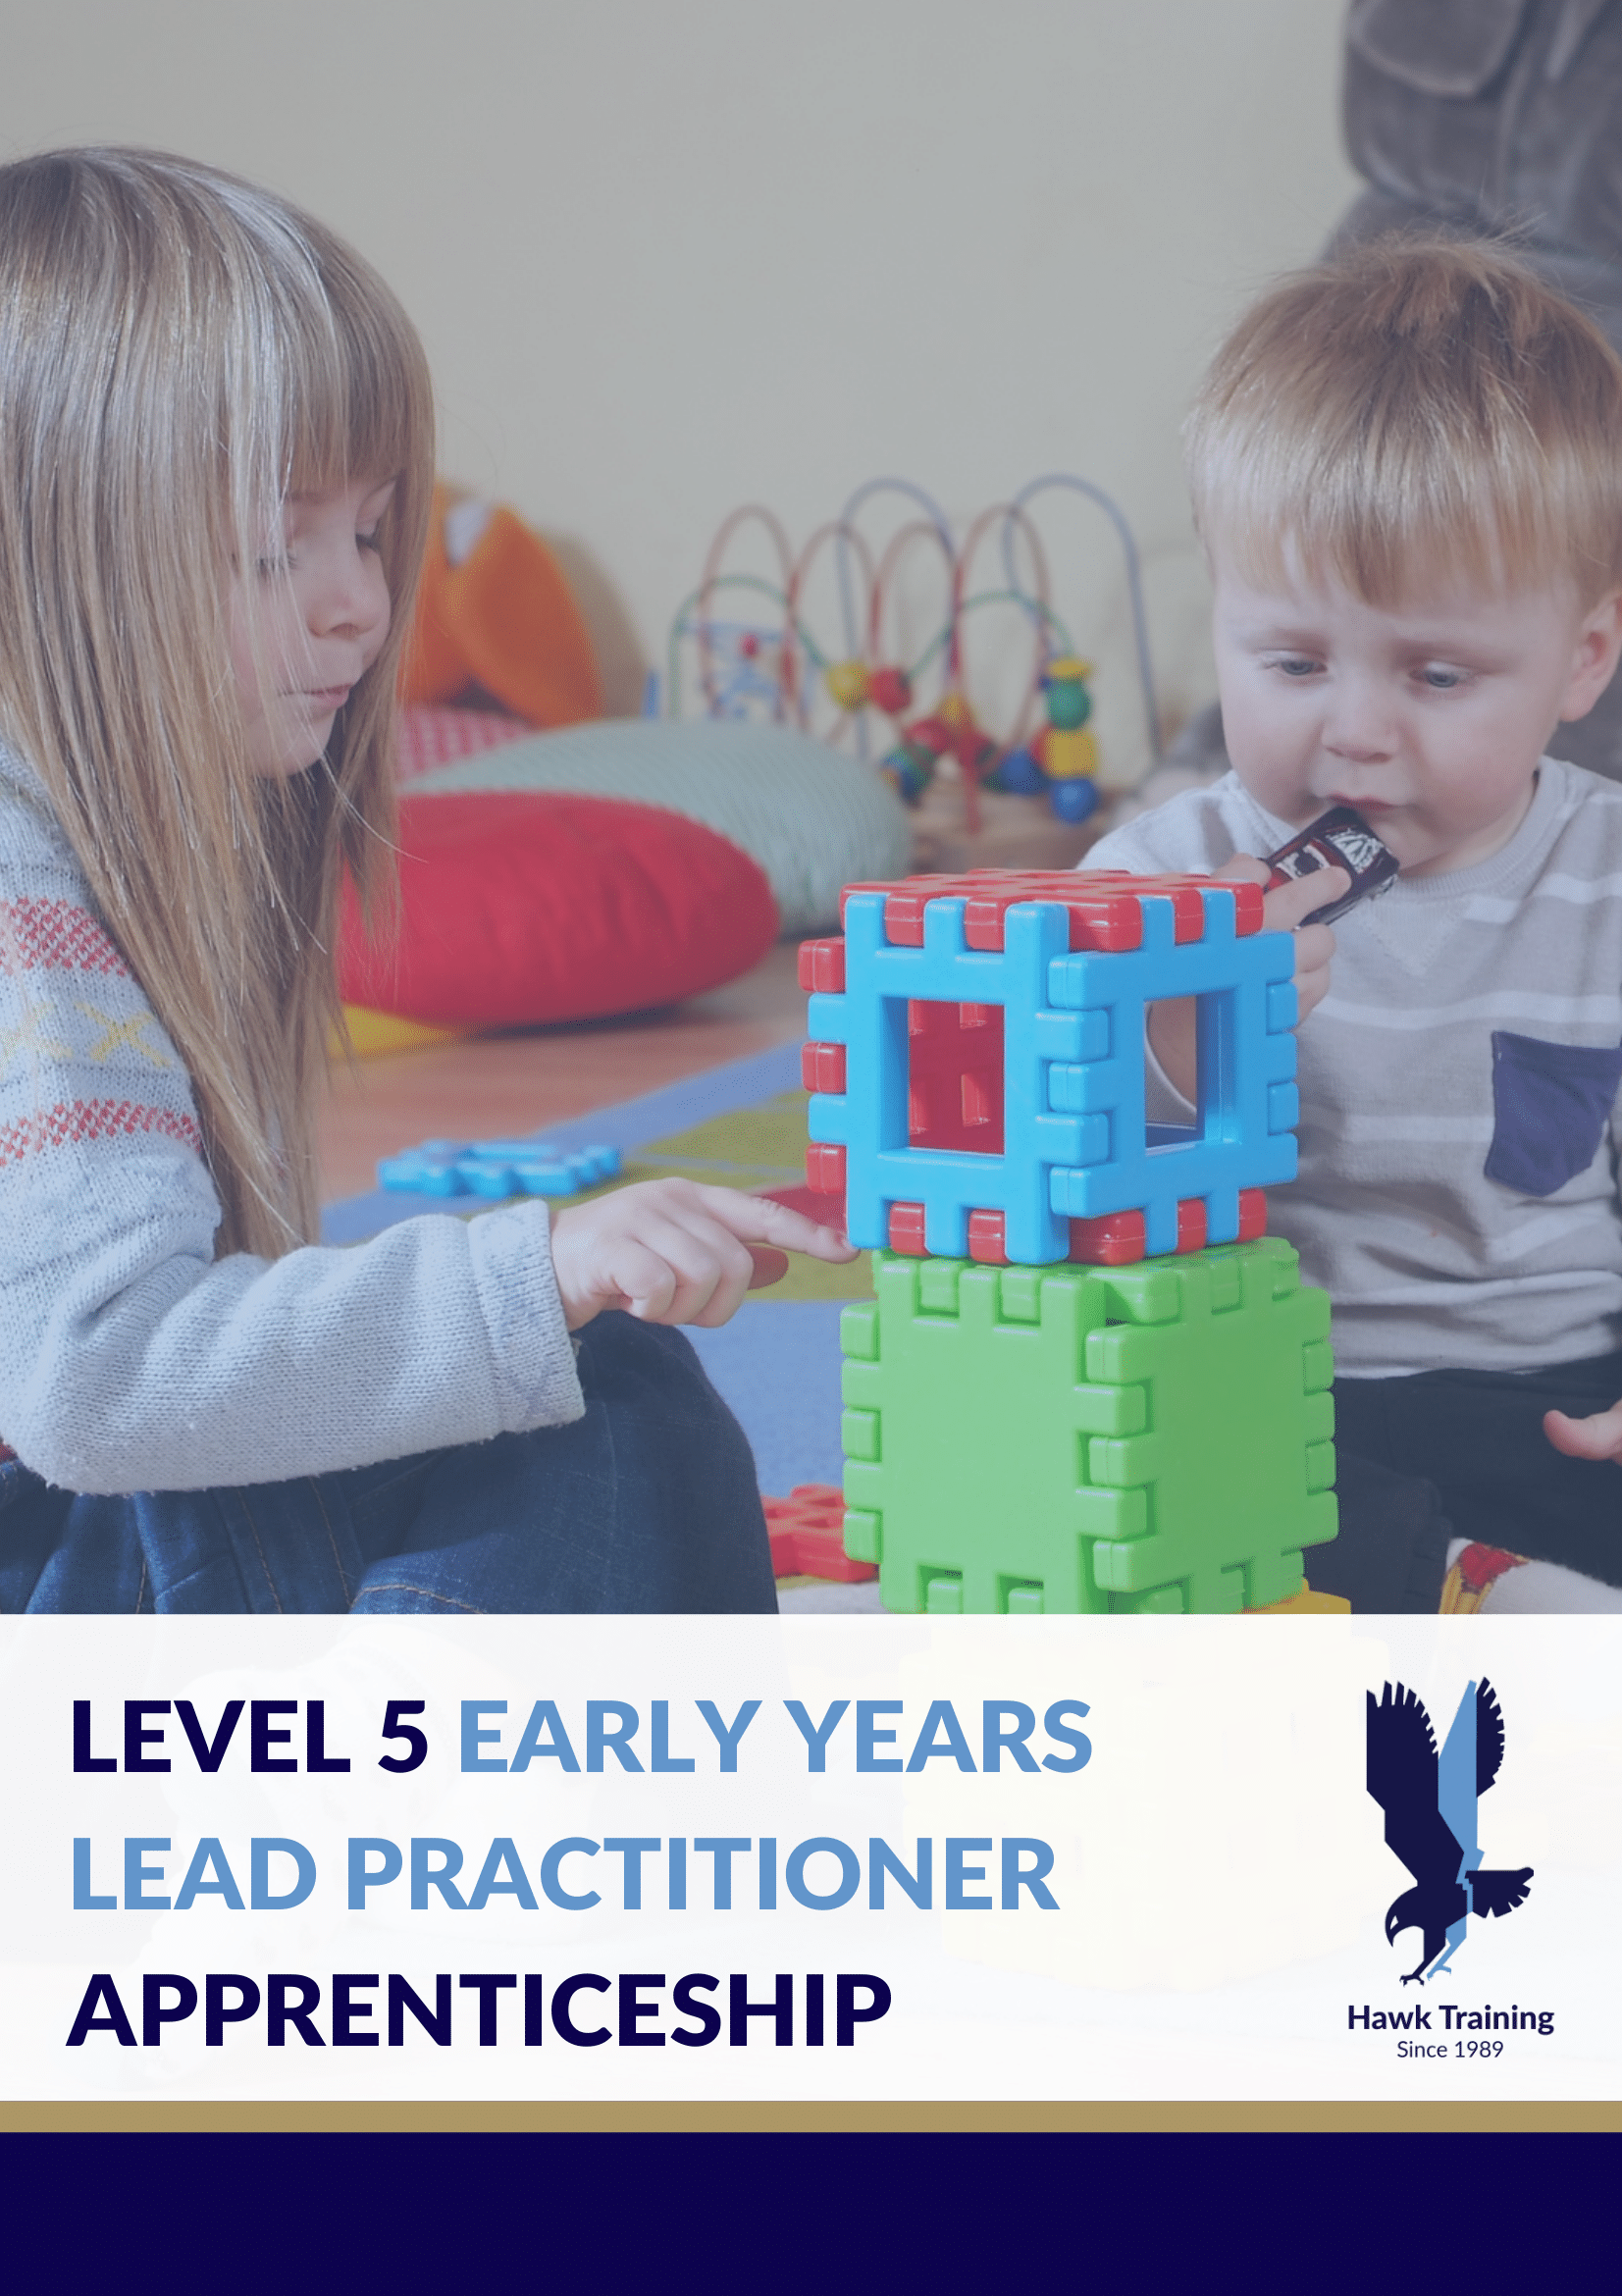 Level 5 Early Years Lead Practitioner Apprenticeship Programme